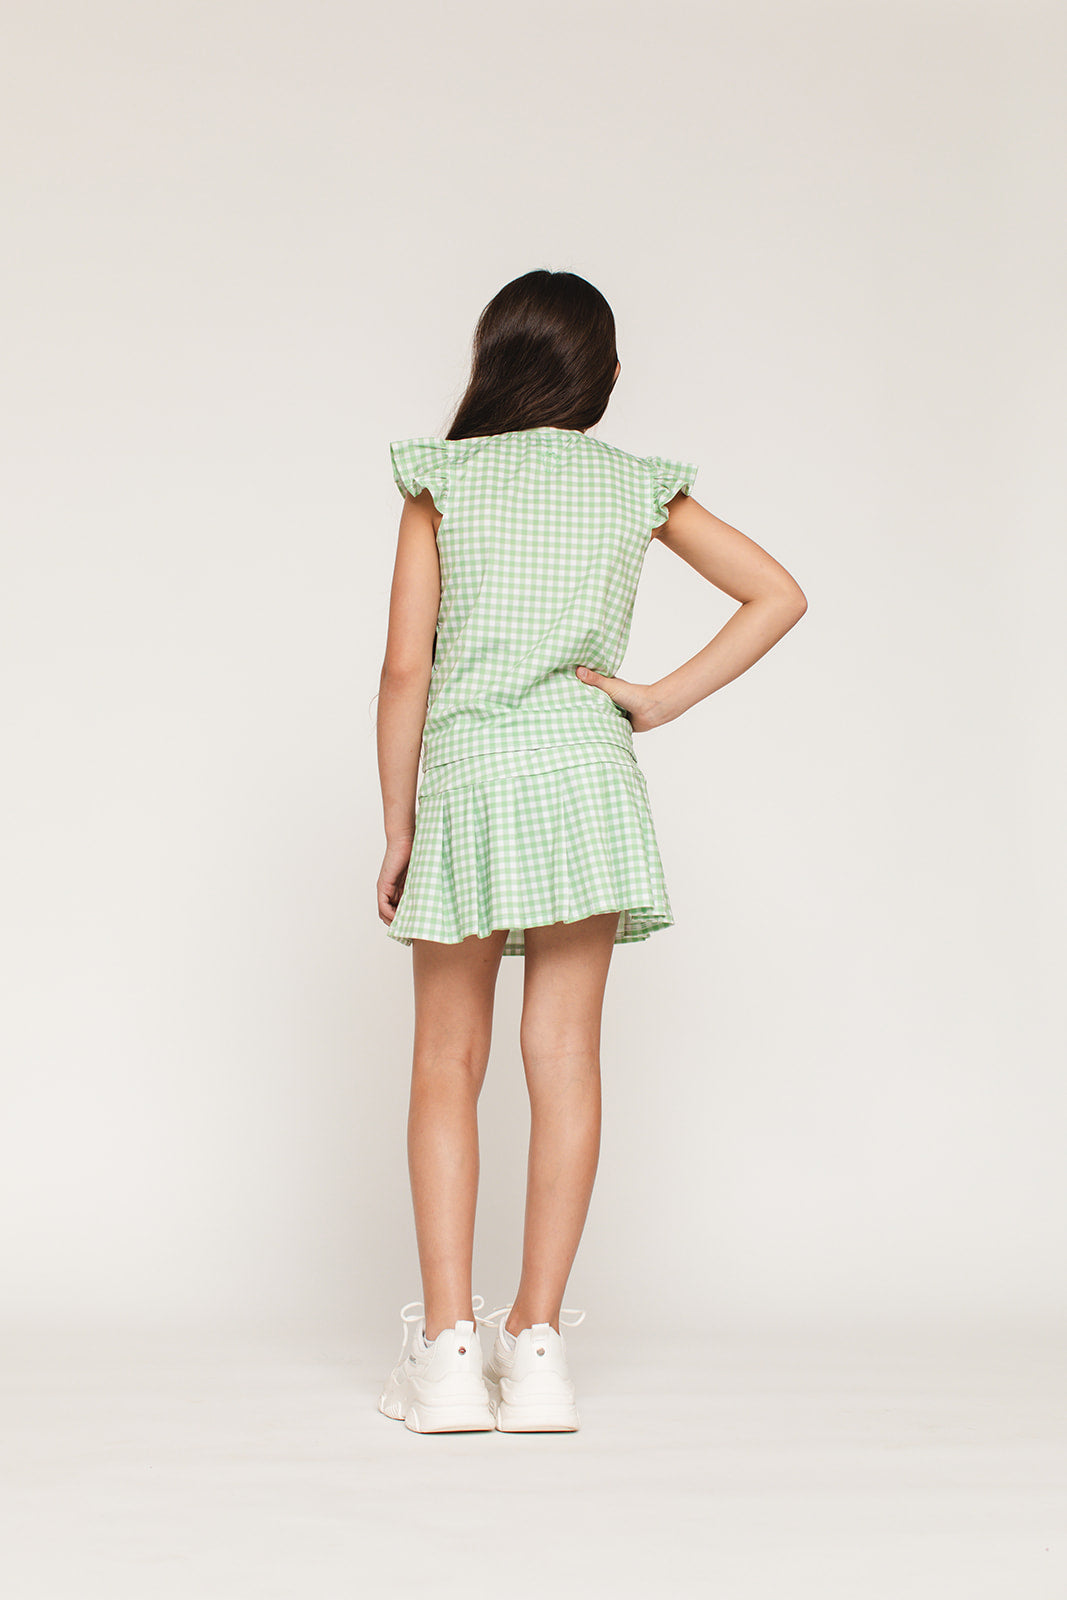 The Girl's Tennis Skirt and Top Set - Gingham